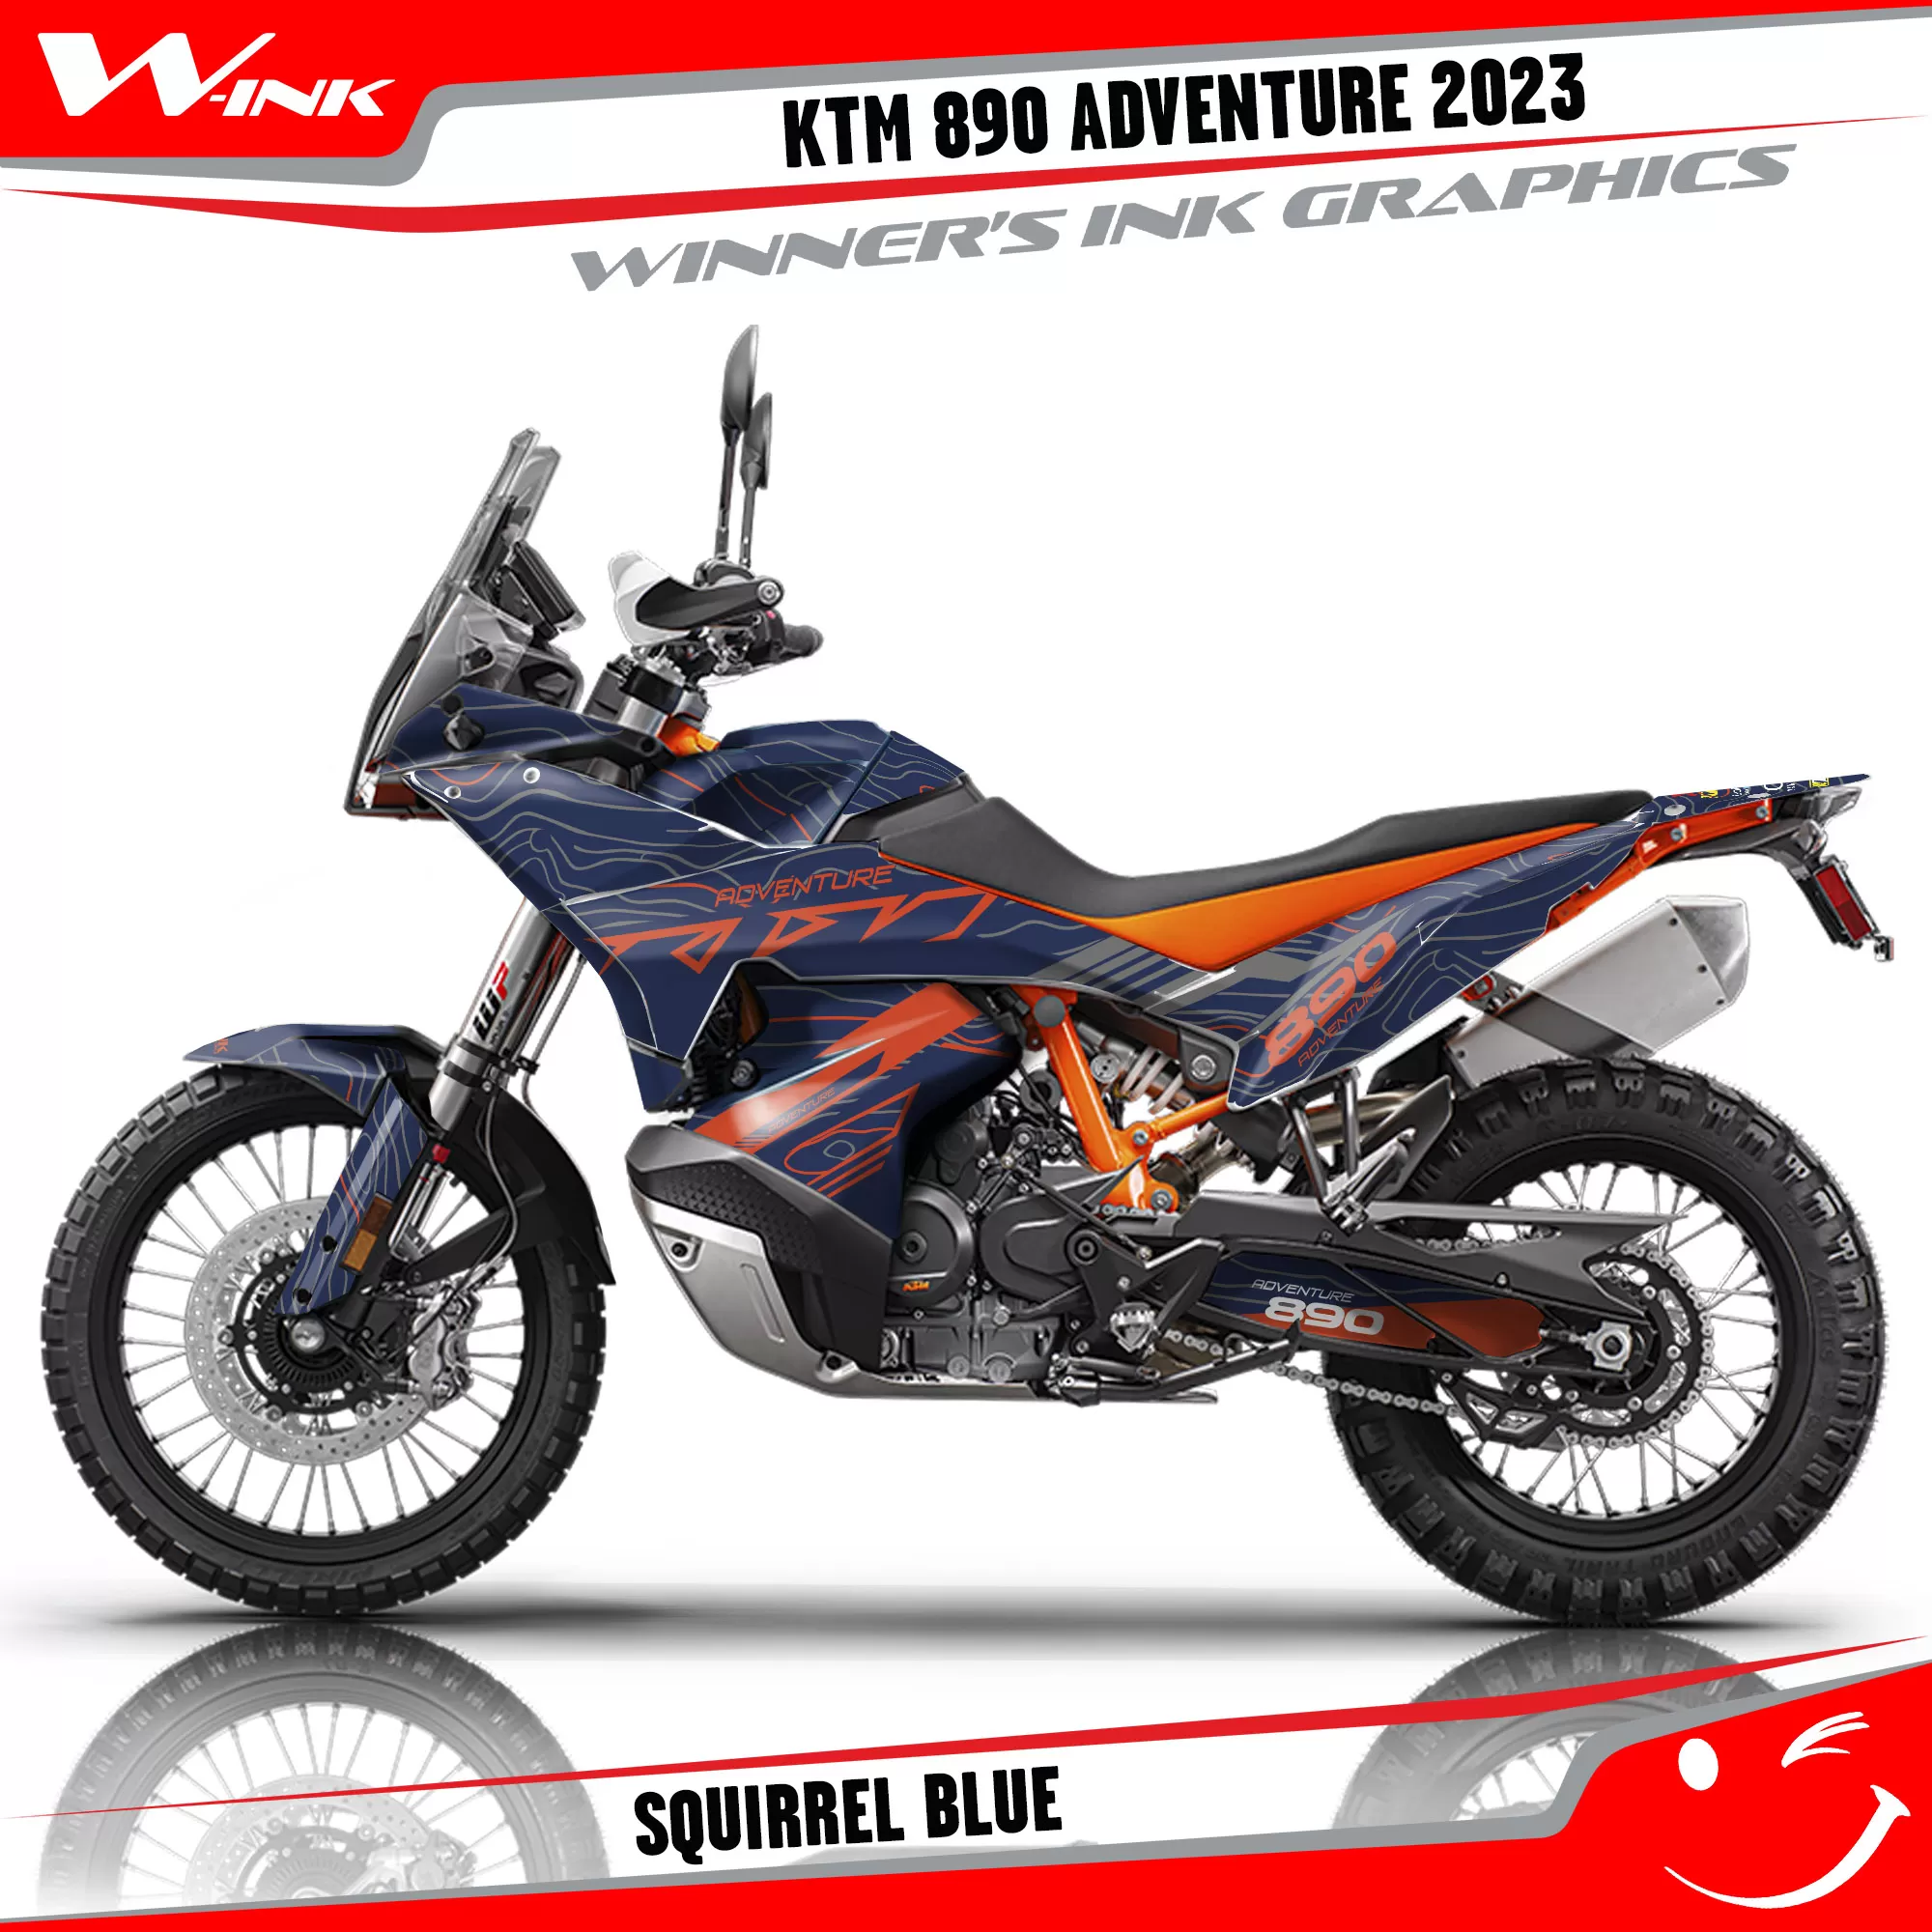 Adventure-890-2023-graphics-kit-and-decals-with-design-Squirrel-Blue